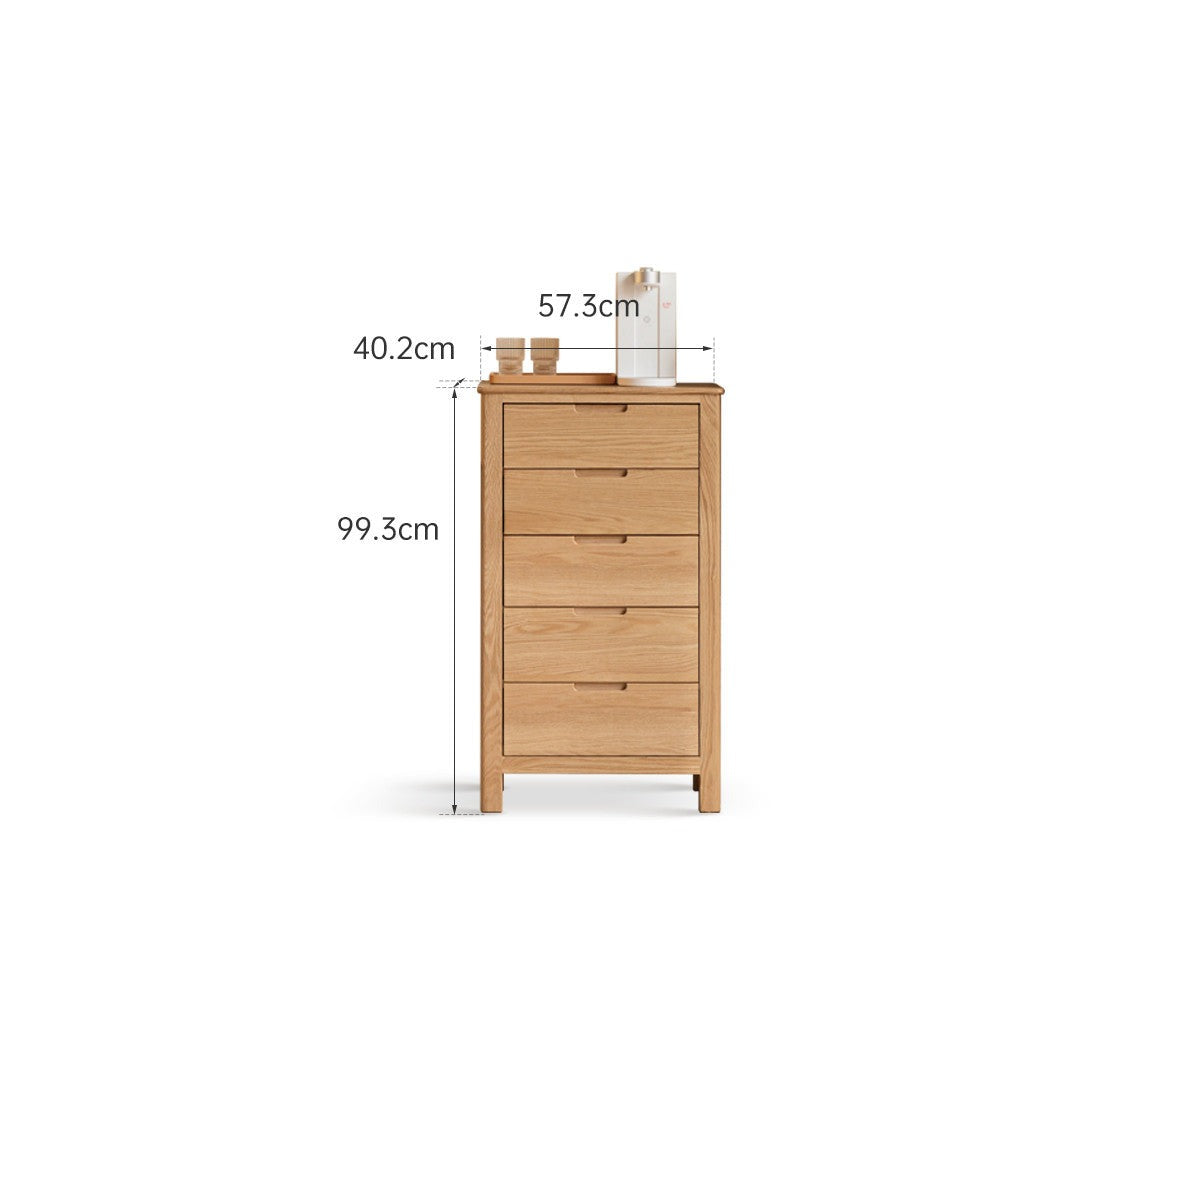 Oak solid wood chest of drawers)